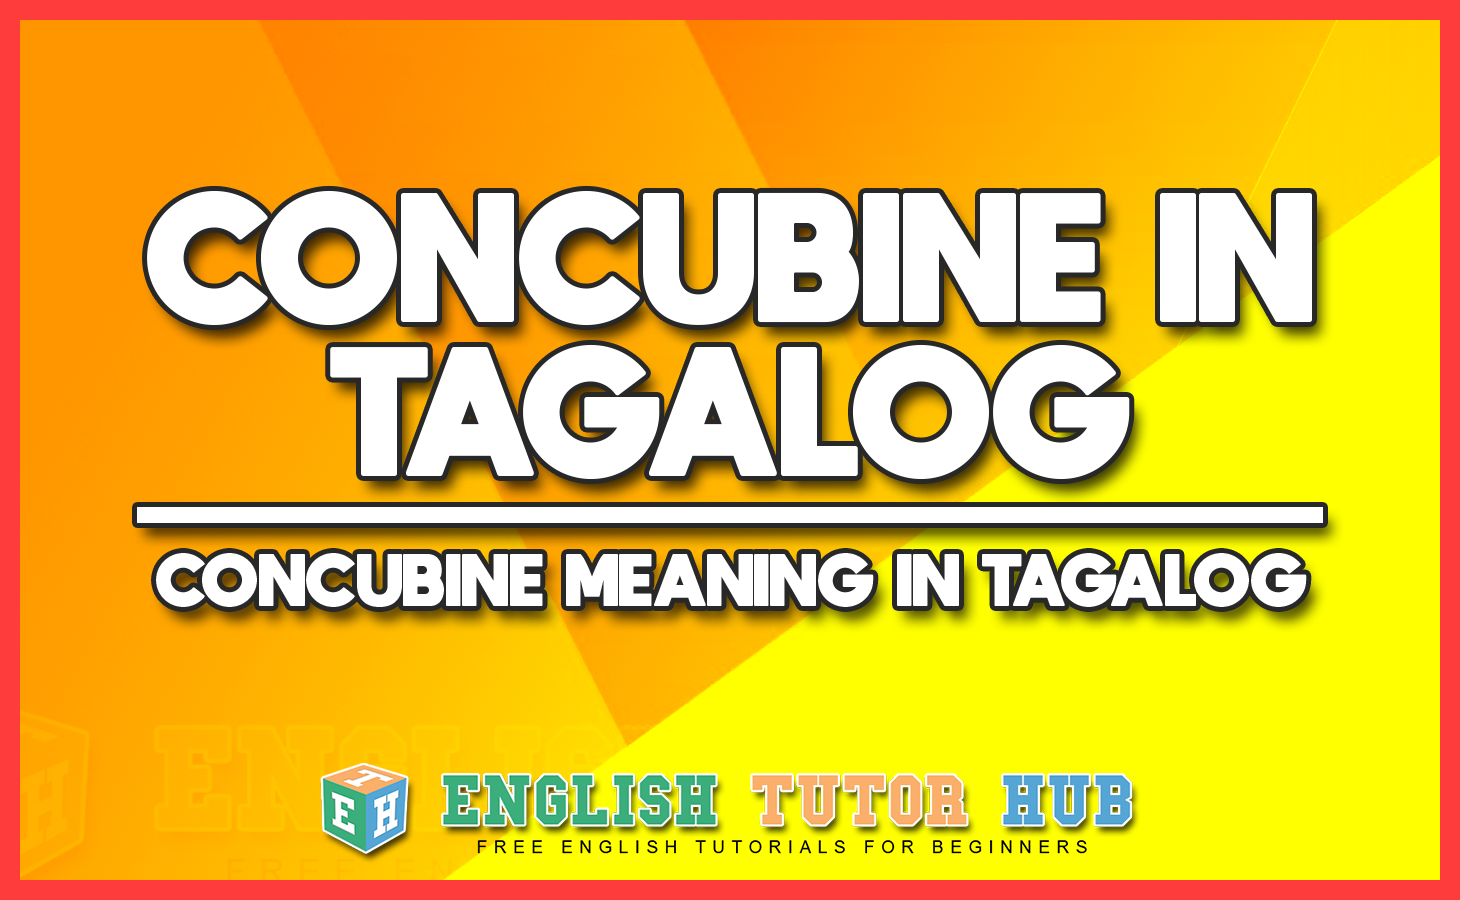 CONCUBINE IN TAGALOG - CONCUBINE MEANING IN TAGALOG